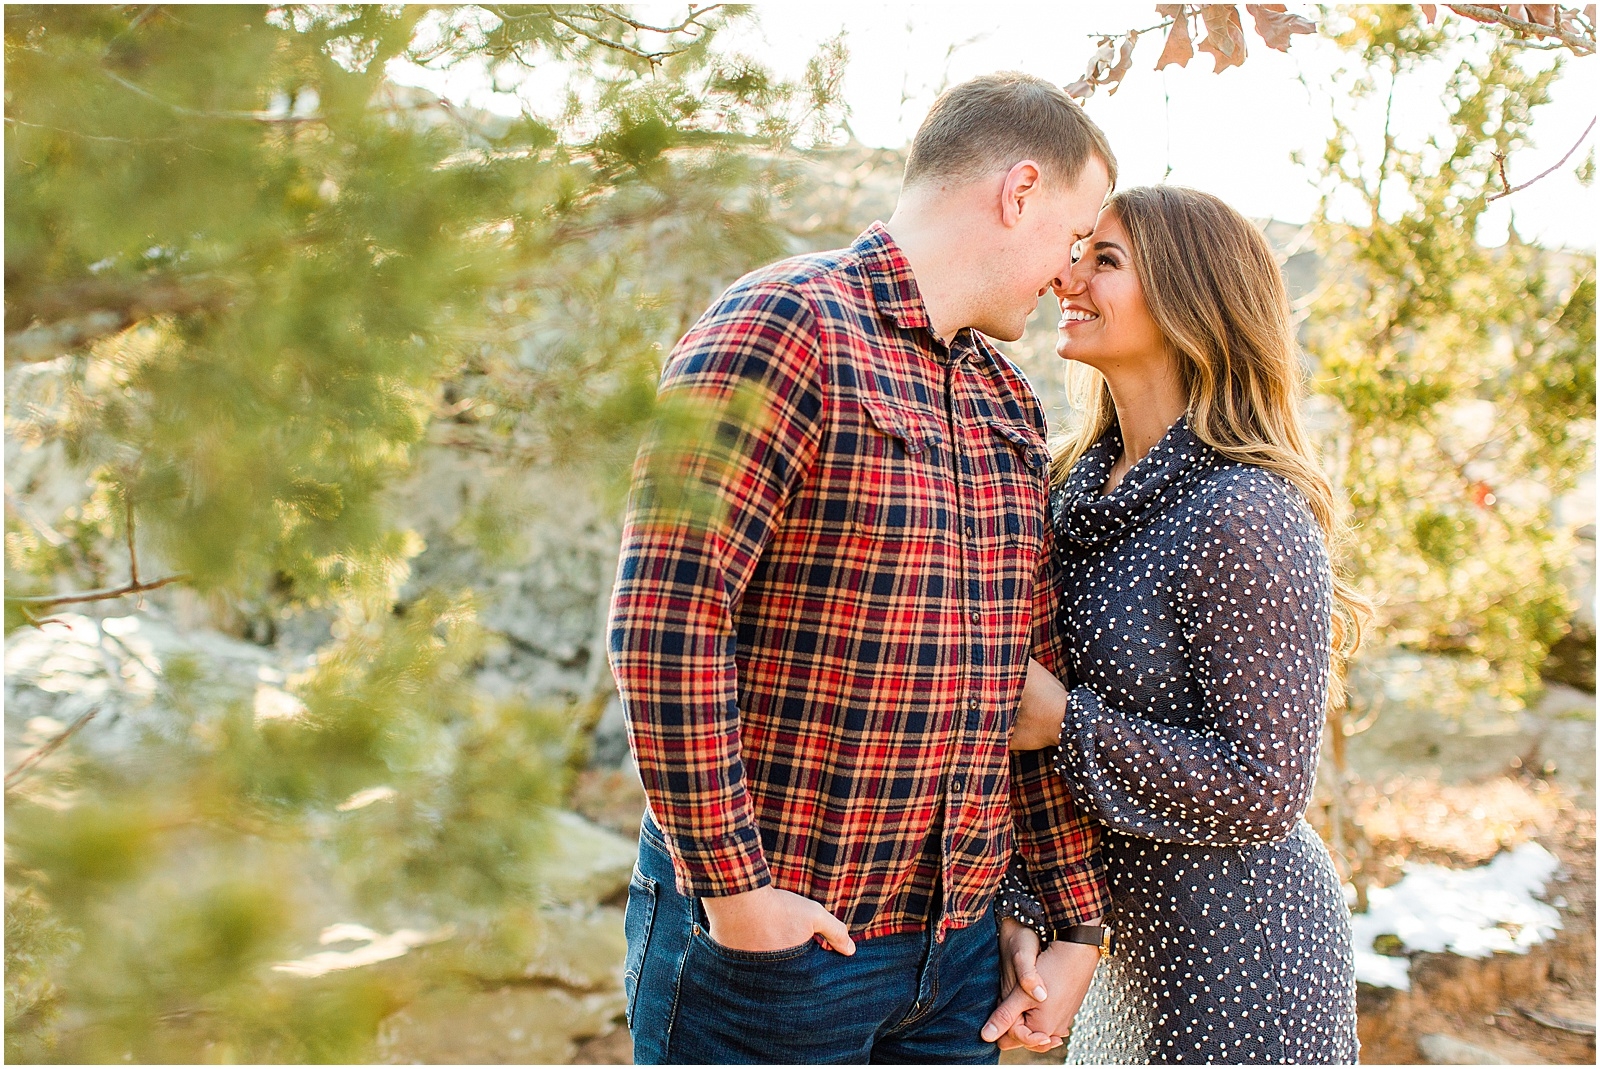 A Sunny Garden of the Gods Engagement Session | Shiloh and Lee | Bret and Brandie Photography007.jpg